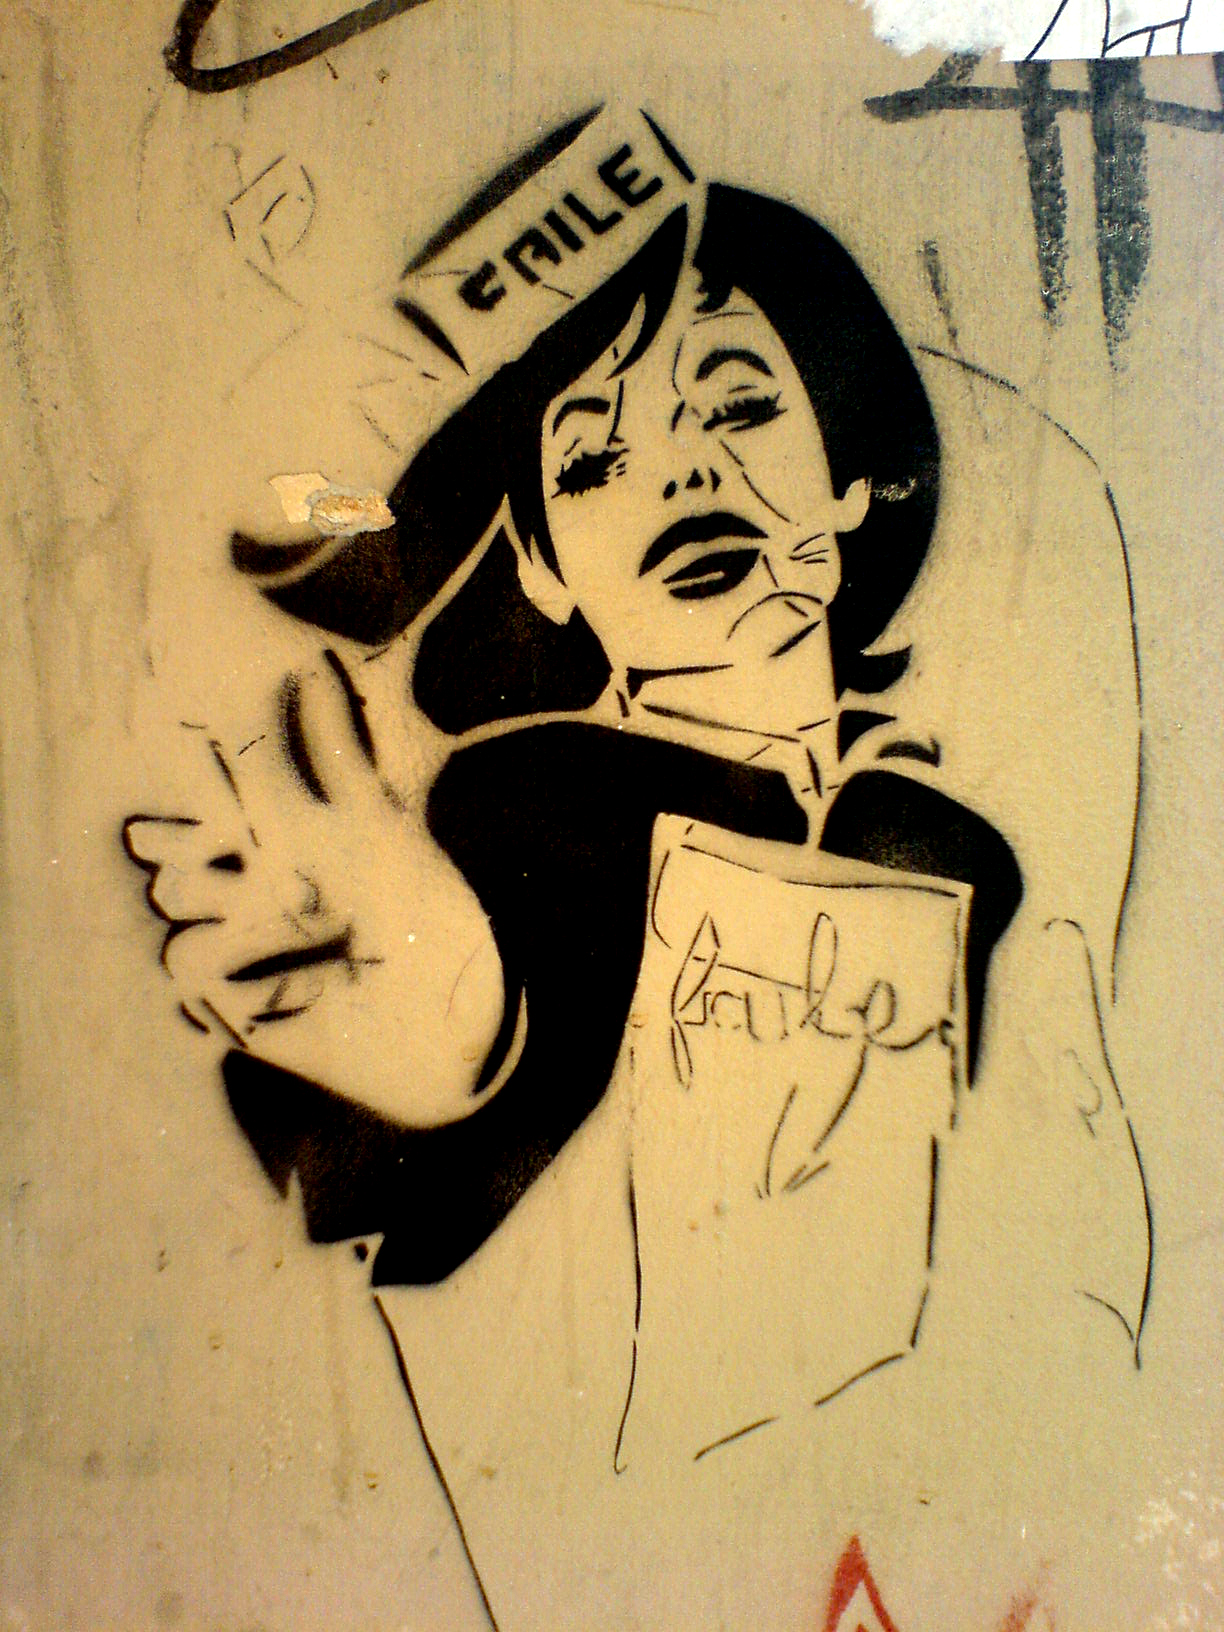 a graffiti drawing of an angry woman pointing with her right hand